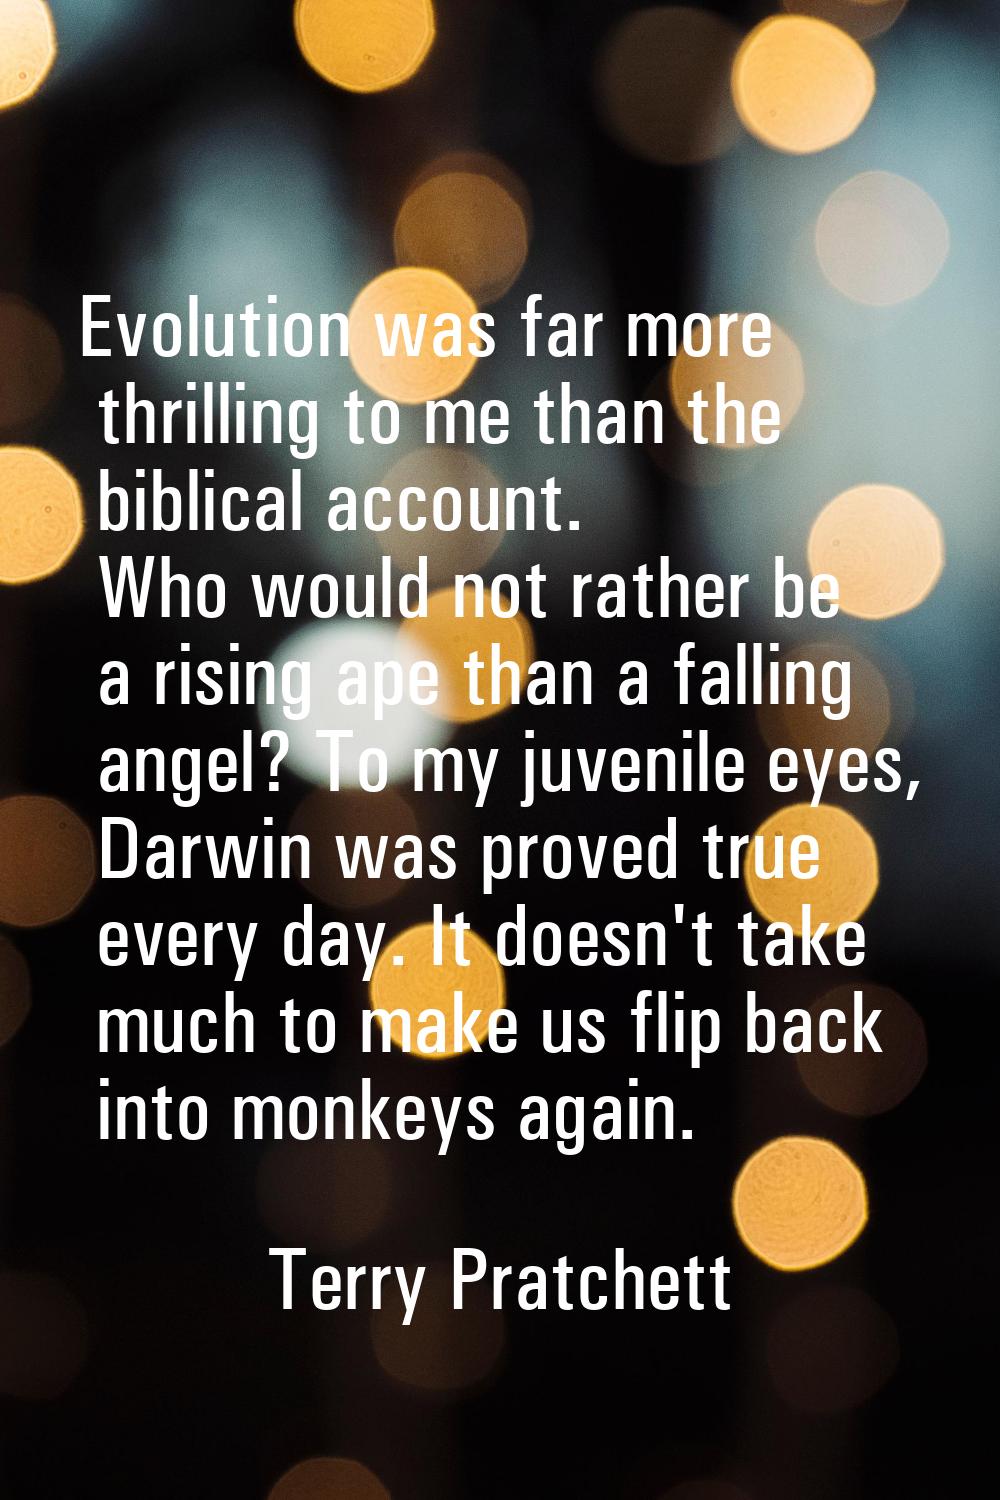 Evolution was far more thrilling to me than the biblical account. Who would not rather be a rising 